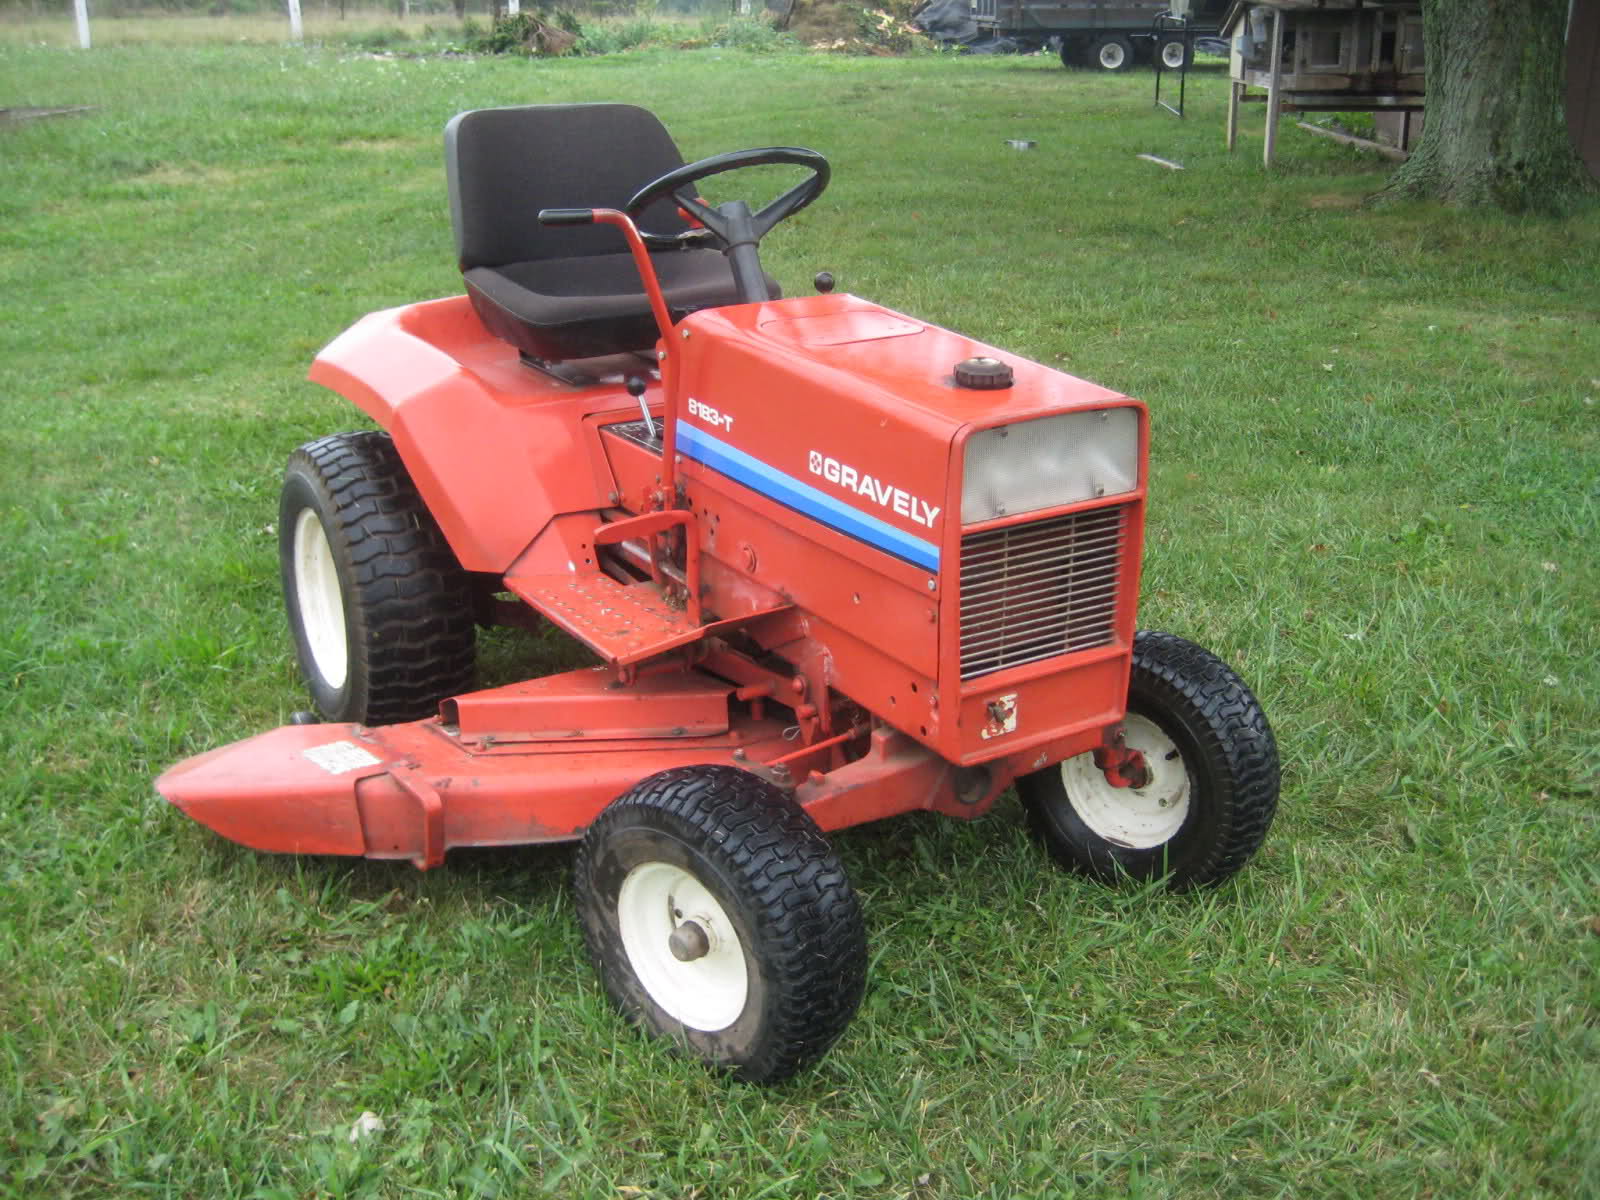 Gravely 8183-T for sale in PA - Tractor Forum